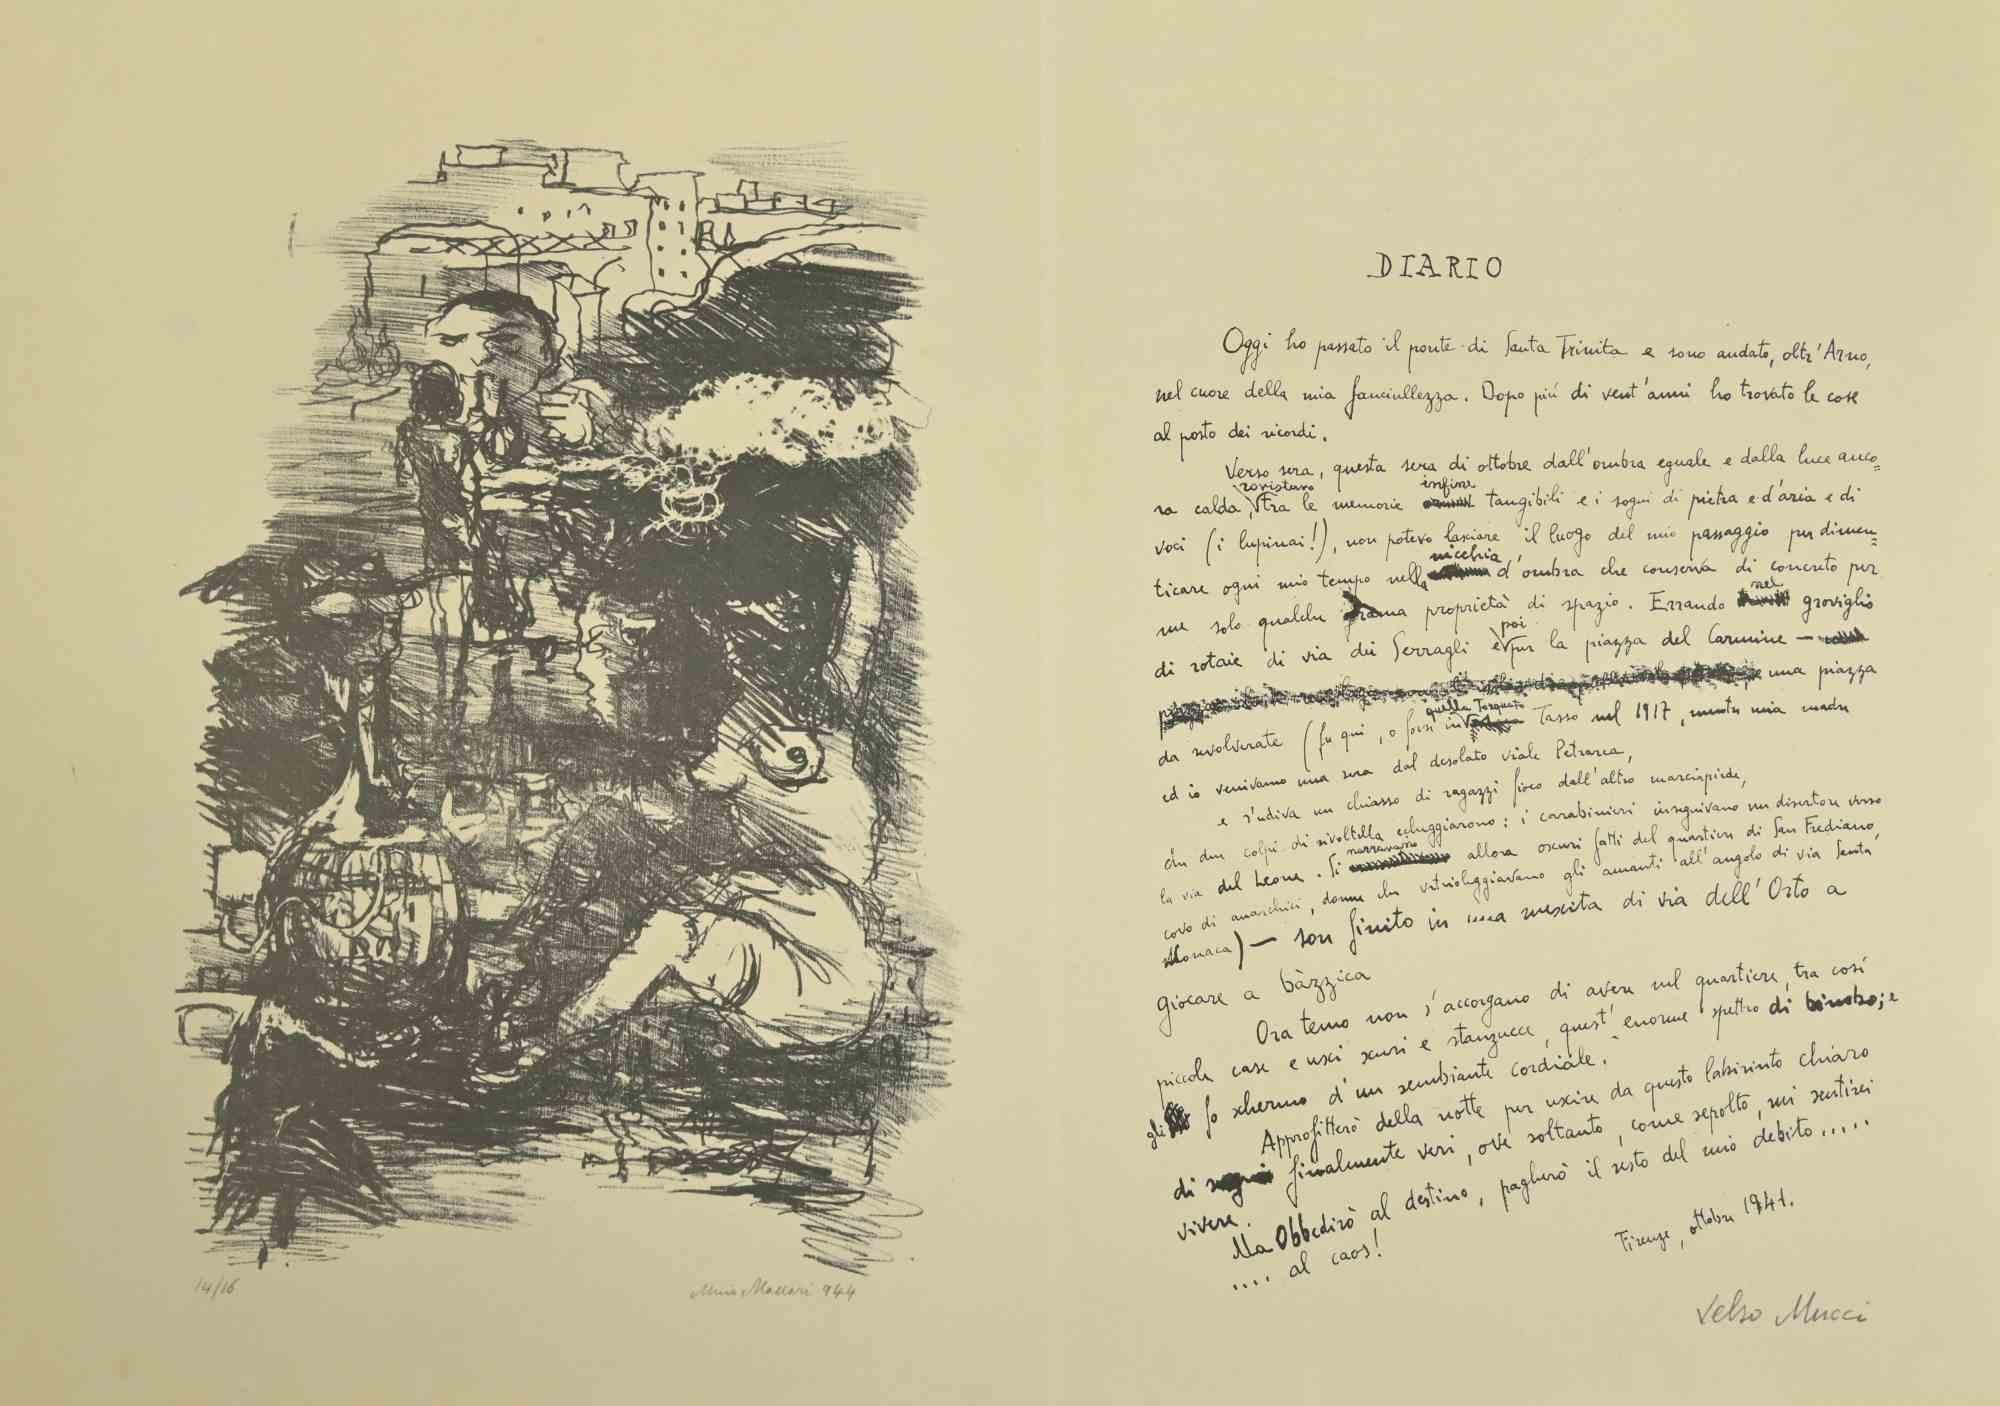 The Diary is a modern artwork realized by Mino Maccari, and Velso Mucci, in 1944-1947.

Black and white lithograph realized by Maccari and a test written by Valso Mucci in Italian on the second page.

The lithograph is numbered, an edition of 14/16